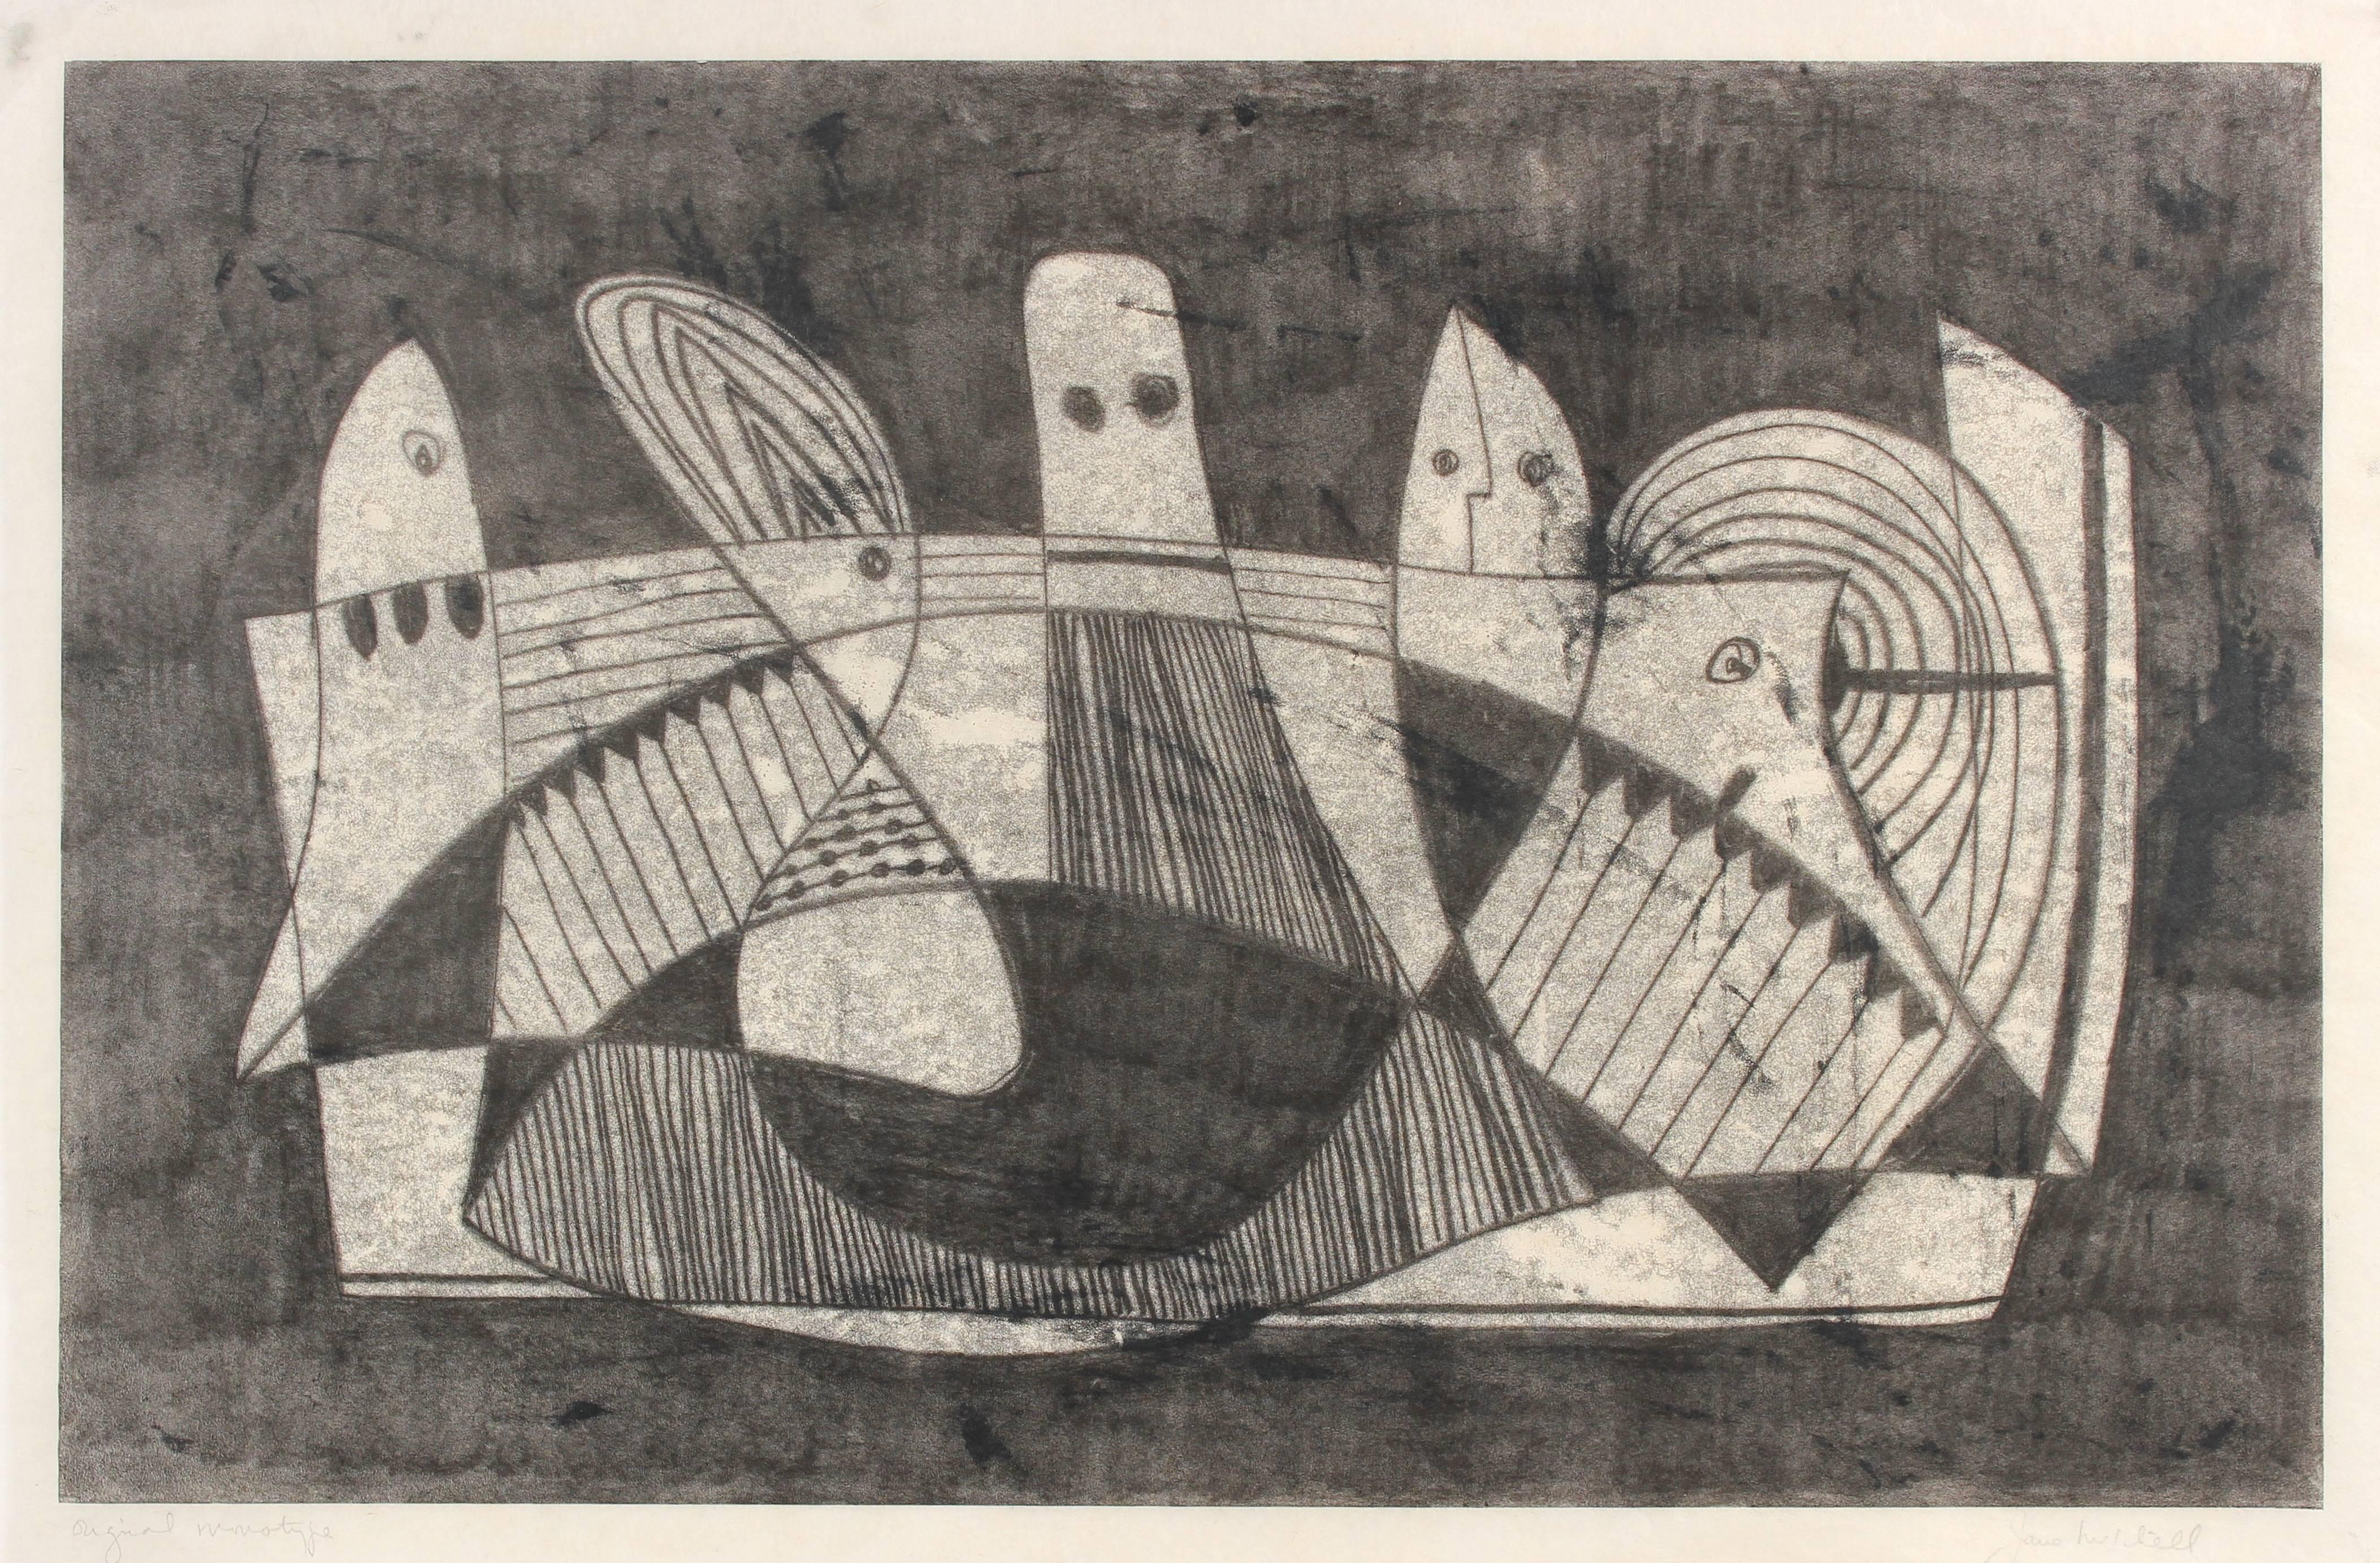 Jane Mitchell Figurative Print - Abstracted Cubist Figures, Monotype on Paper, Circa 1970